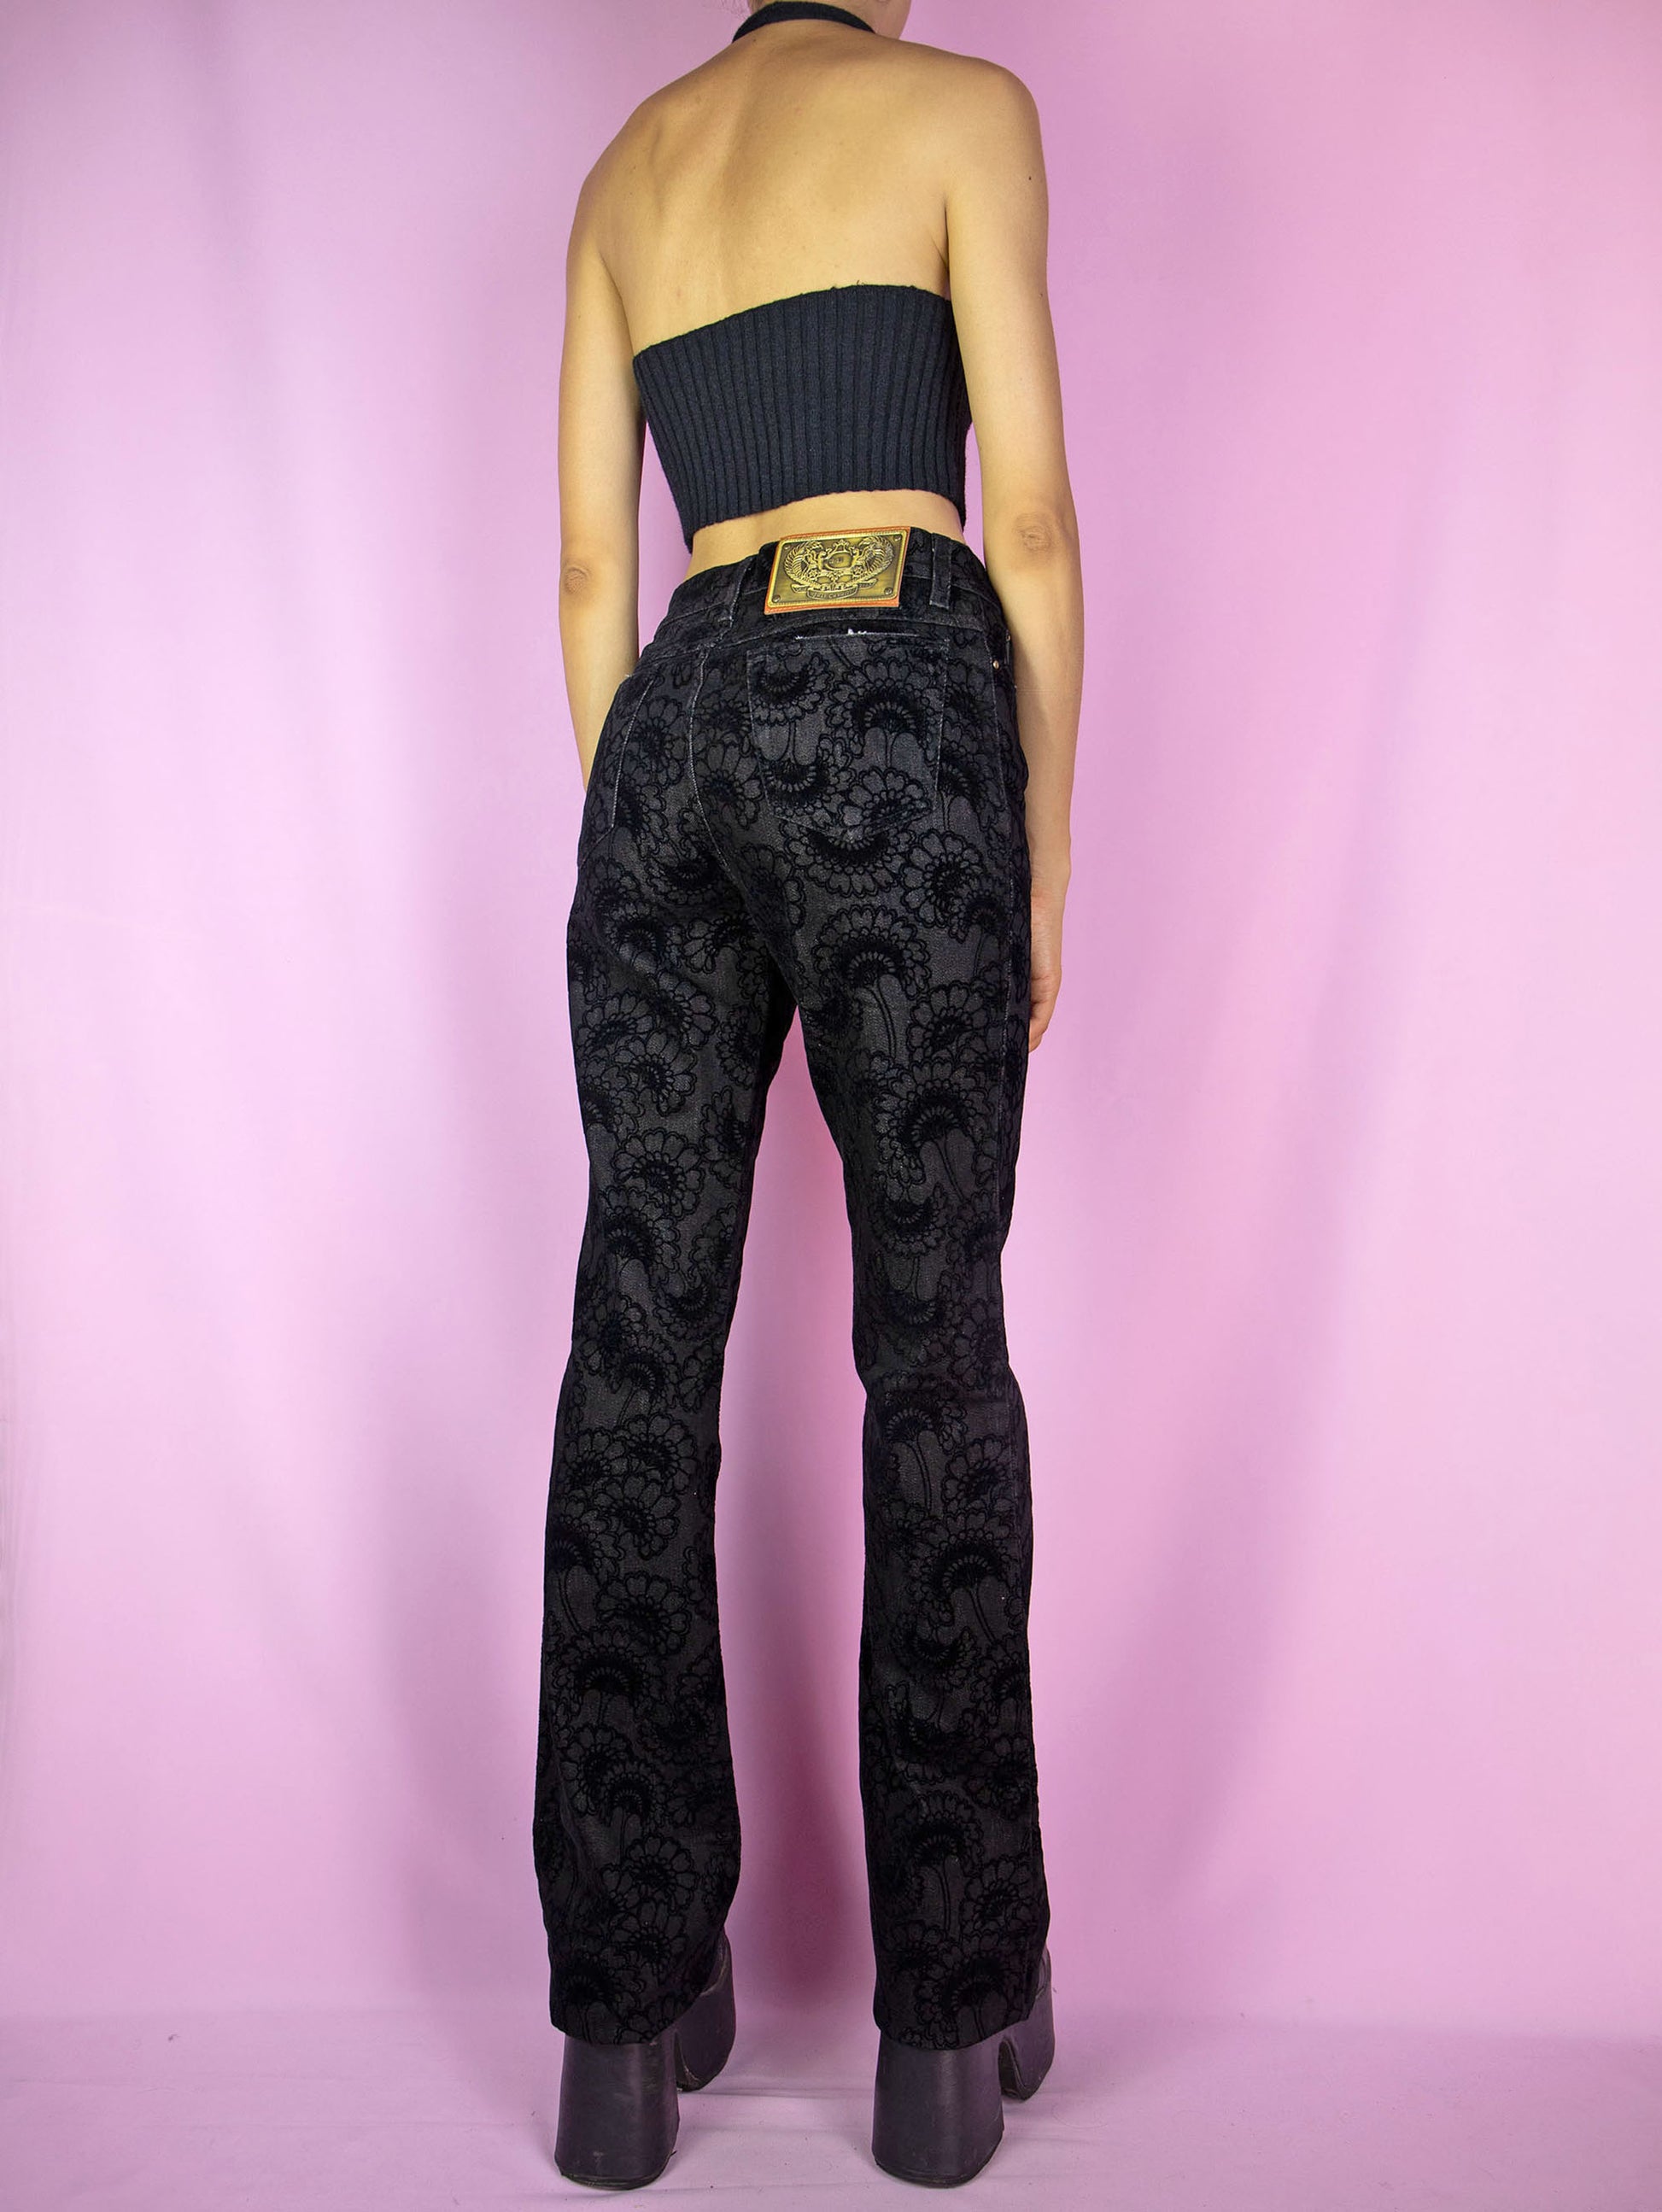 The Y2K Cavalli Black Straight Jeans are vintage 2000s mid-rise straight-leg pants, slightly stretchy adorned with floral velvet details by italian designer Roberto Cavalli. Excellent vintage condition.